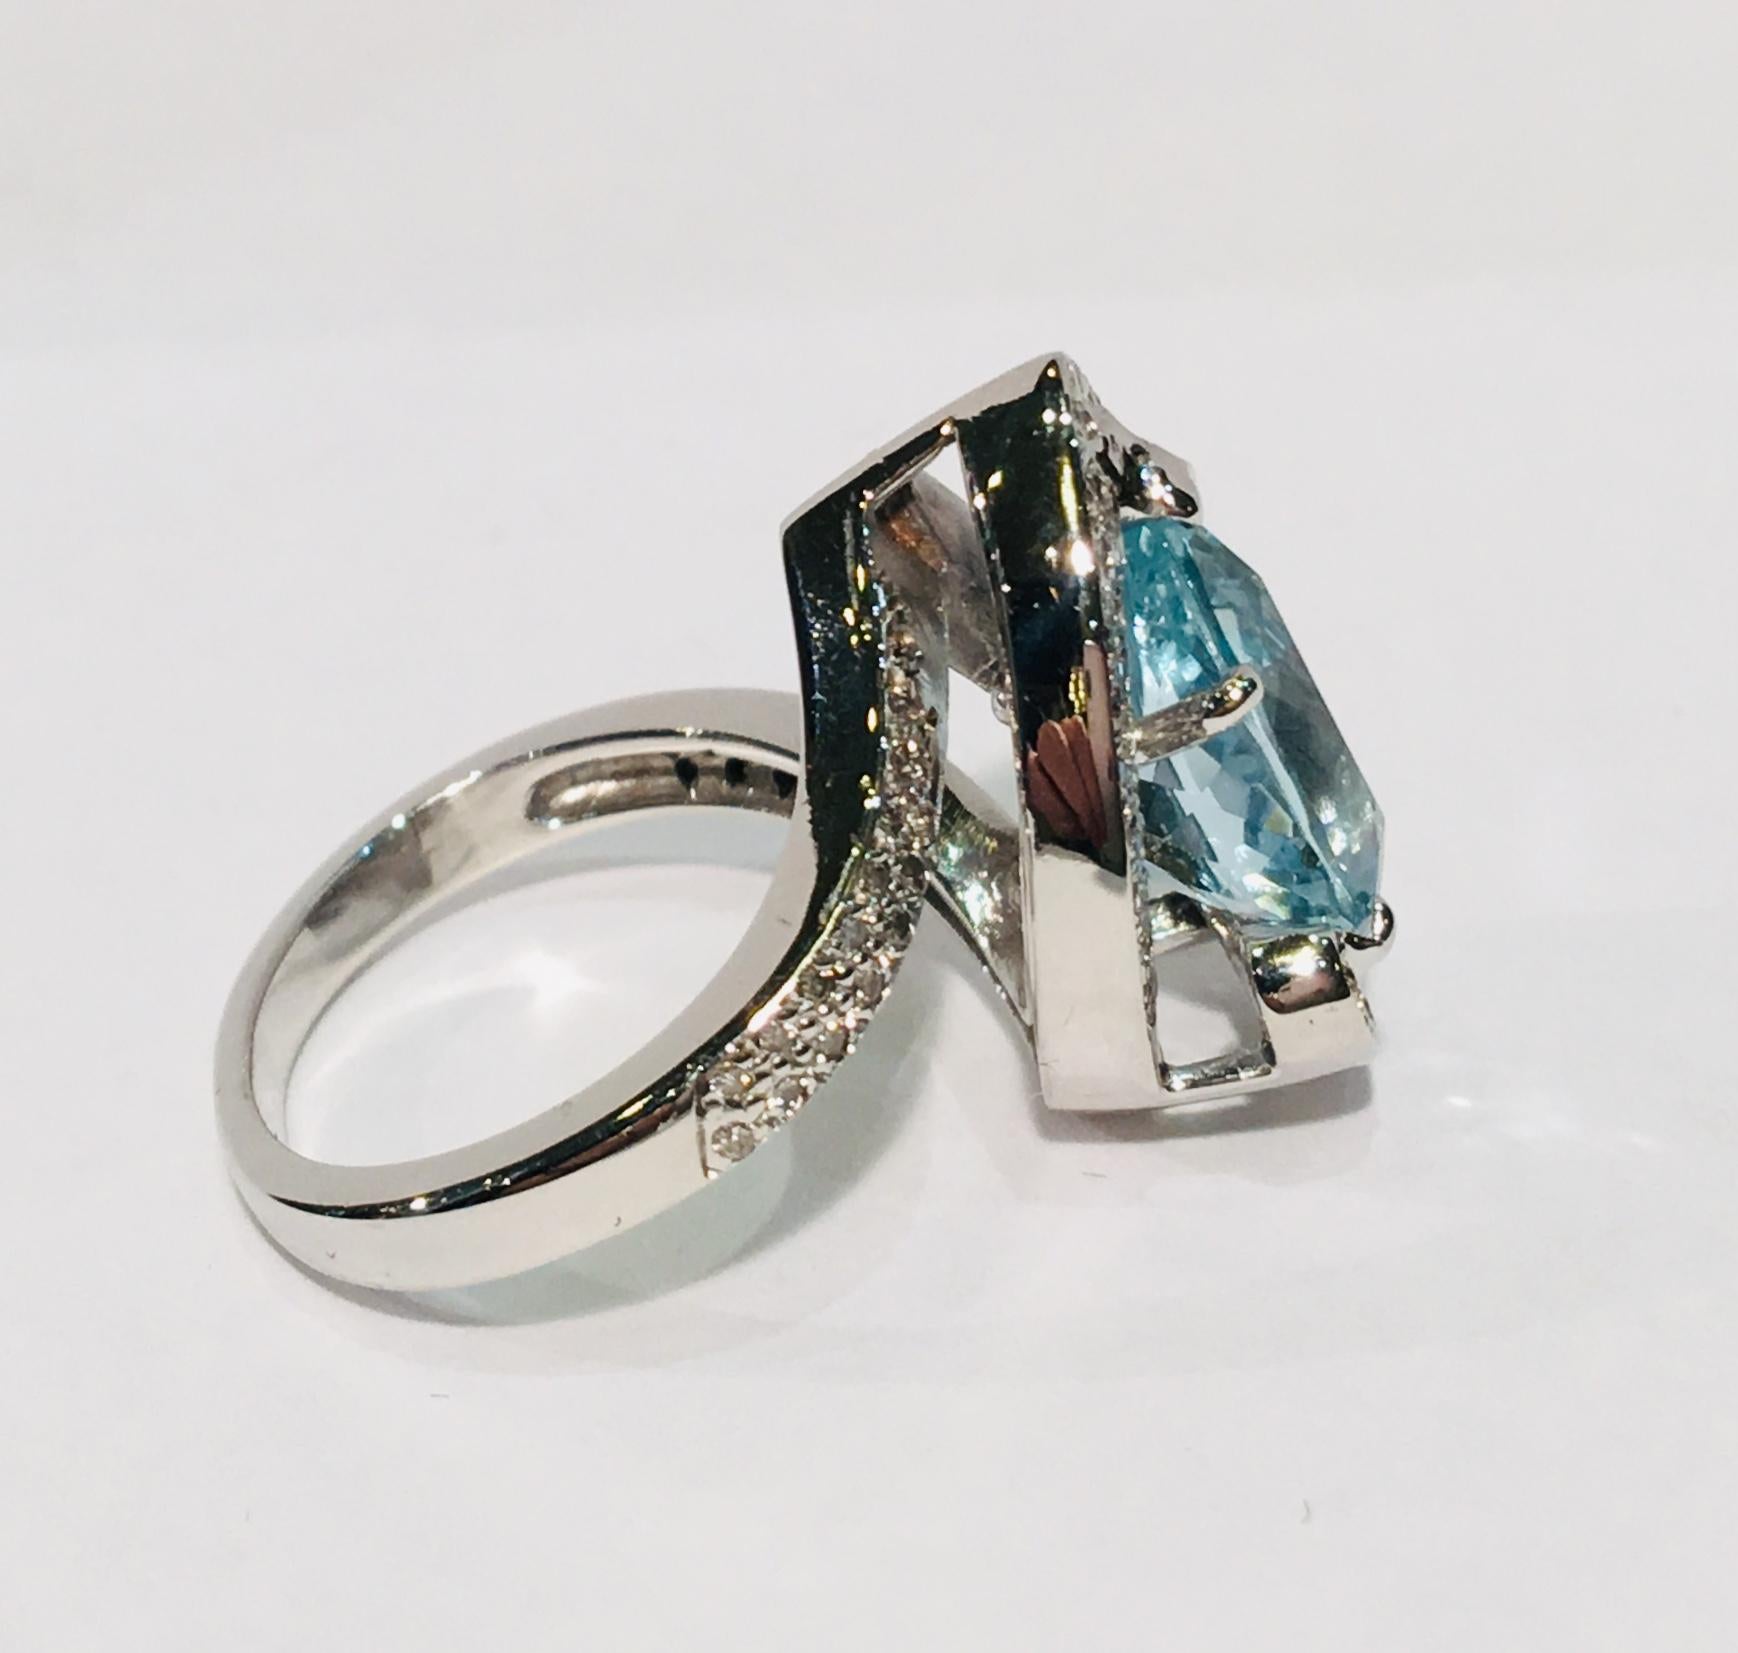 A large, sparkling pear cut aquamarine is prong set at an angle in 18 karat white gold and embellished with a two-tier halo of pave set diamonds in this contemporary estate ring.  Pave diamonds also adorn the shank, which connects to the point of